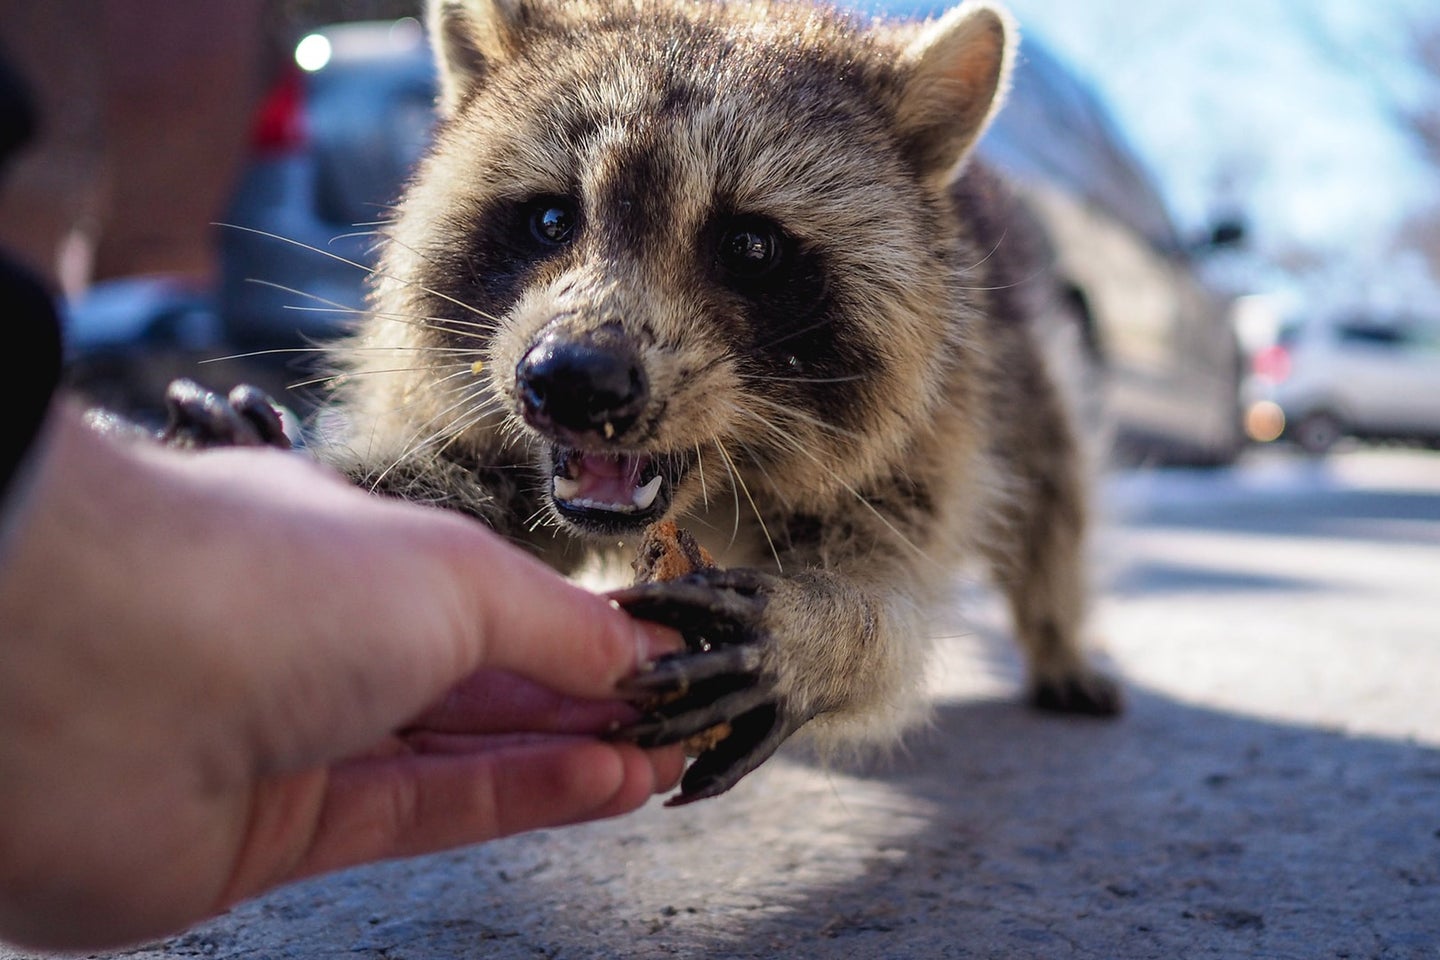 person giving food to a racoon